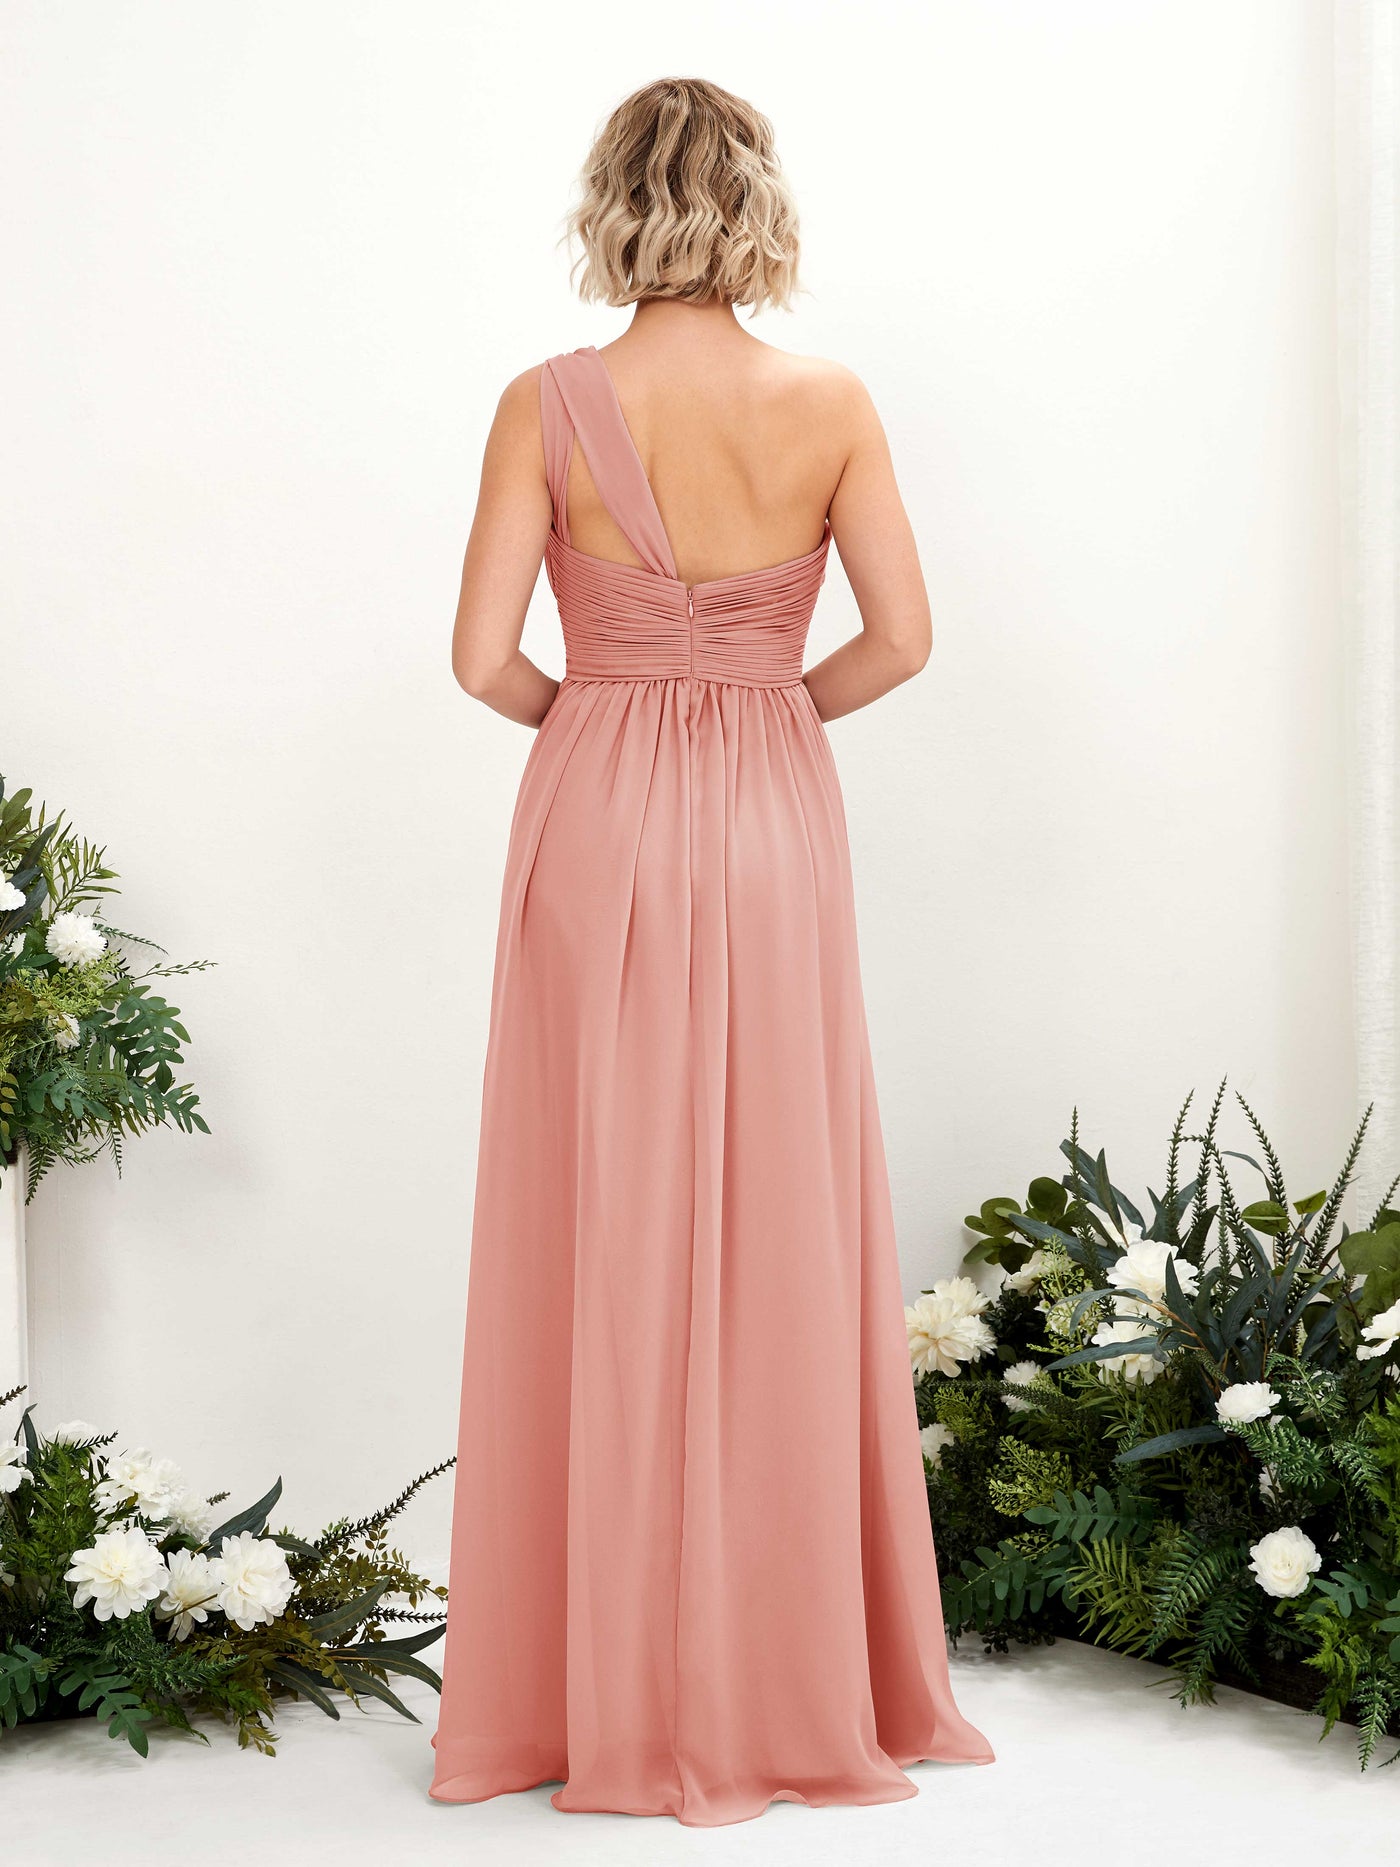 Champagne Rose Bridesmaid Dresses Bridesmaid Dress Ball Gown Chiffon One Shoulder Full Length Sleeveless Wedding Party Dress (81225006)#color_champagne-rose